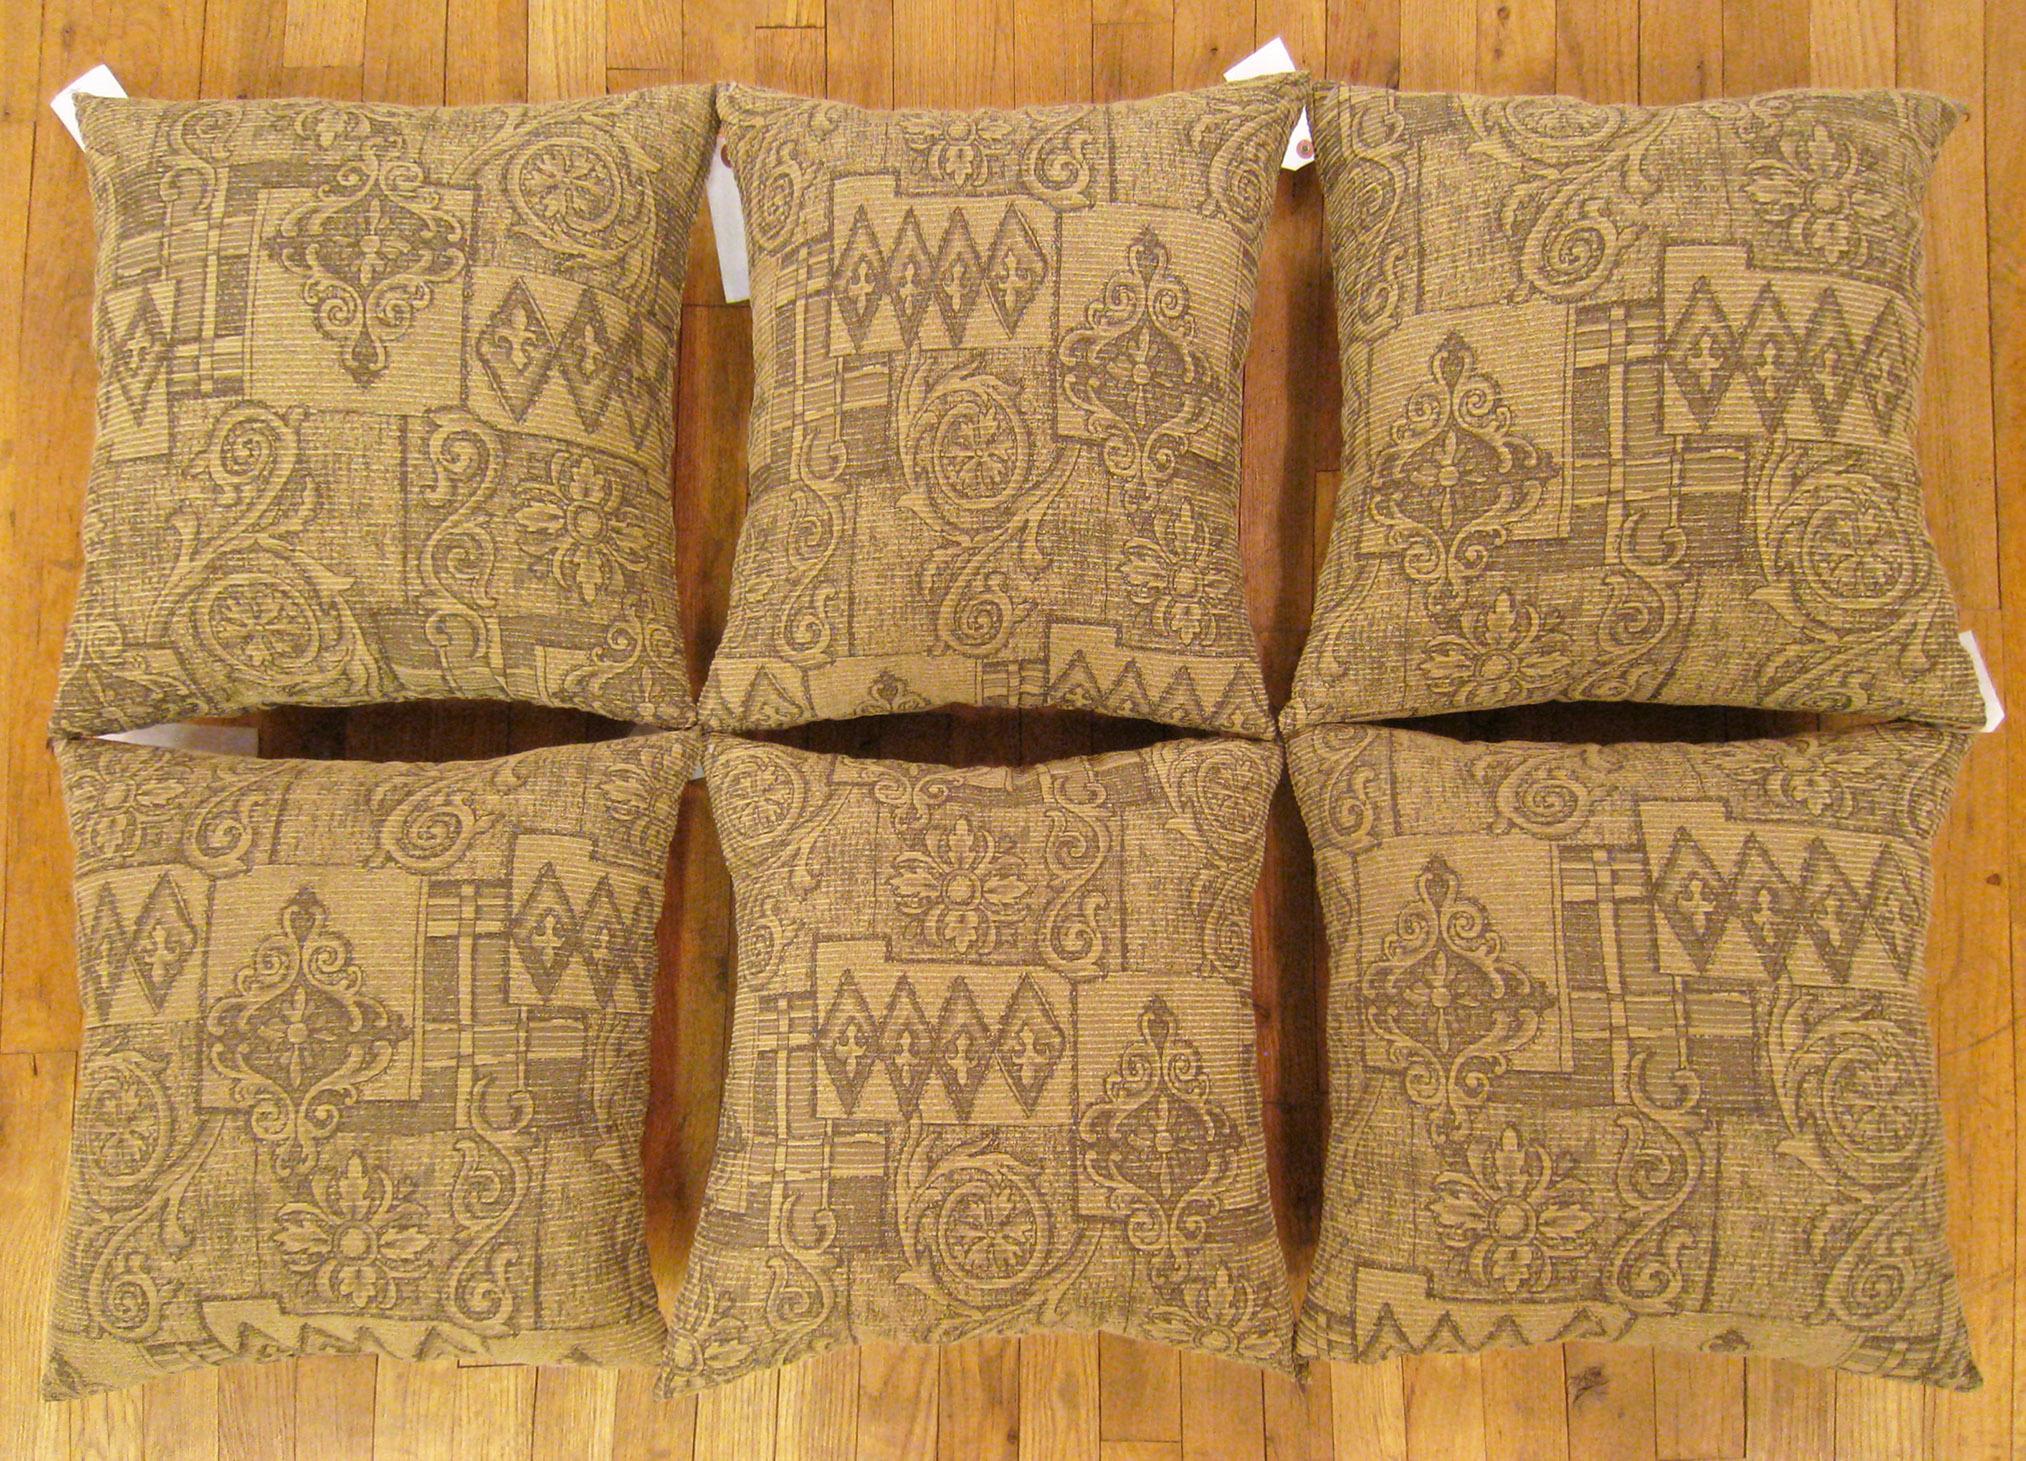 A Set of Vintage Floro-geometric fabric pillows ; size 1'8” x 1'6” Each.

A vintage american pillows with geometric abstracts in a beige central field, size 1'8” x 1'6” each. This lovely decorative pillow features a vintage fabric of a American